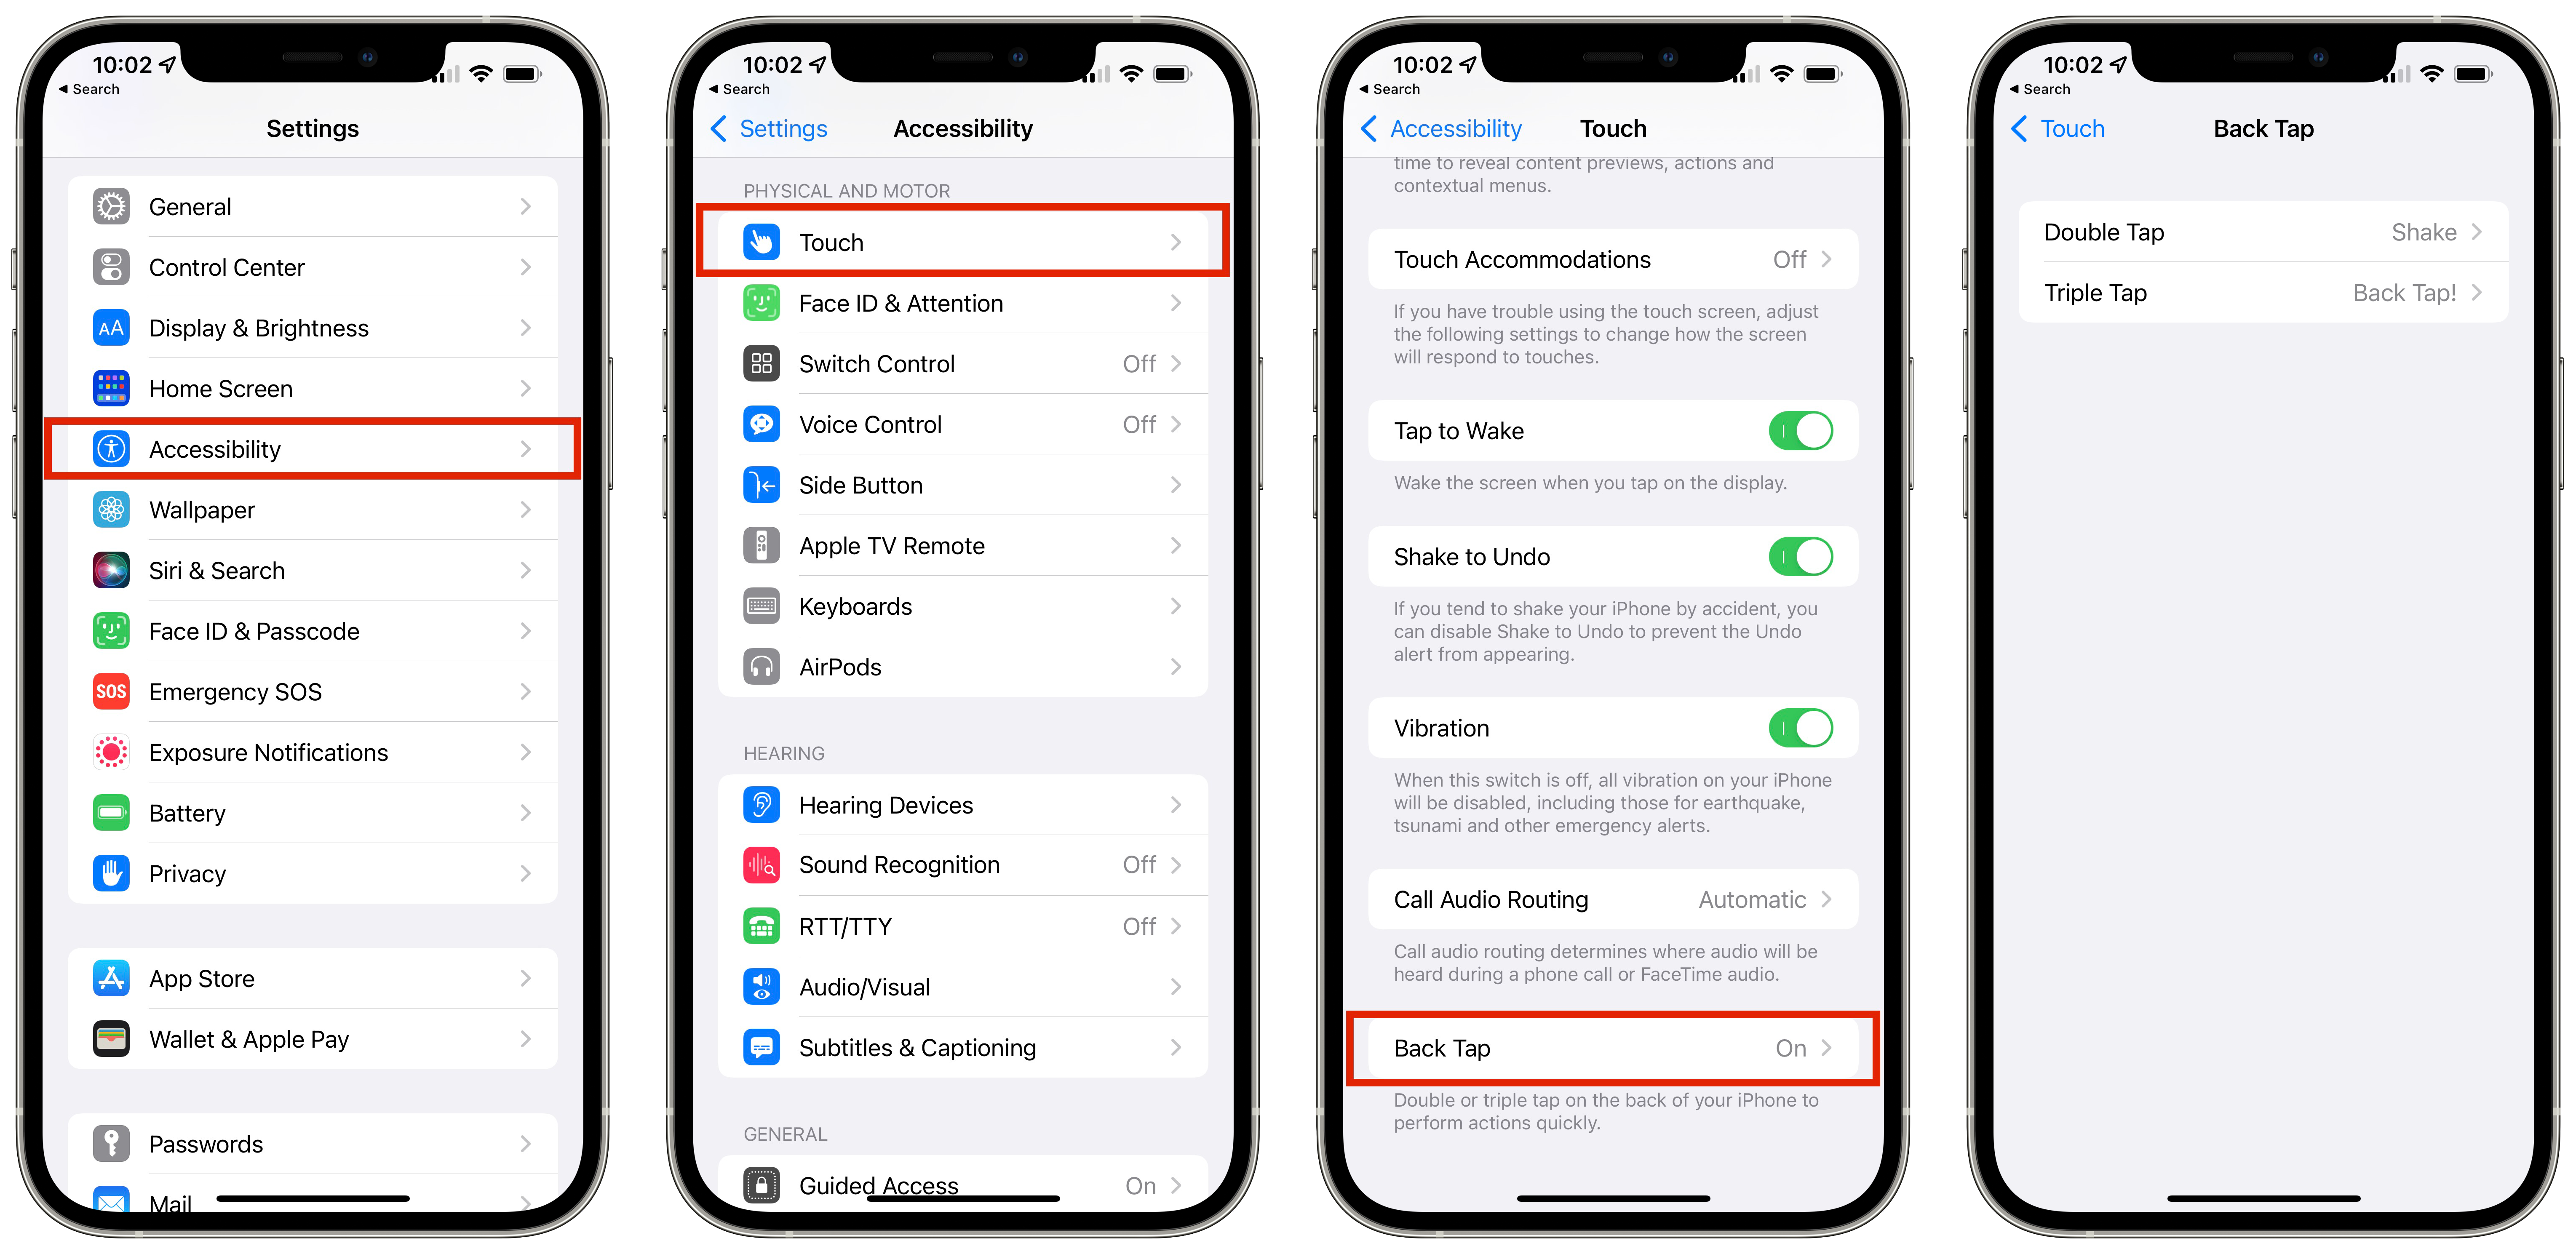 Get to Back Tap Through Accessibility Settings